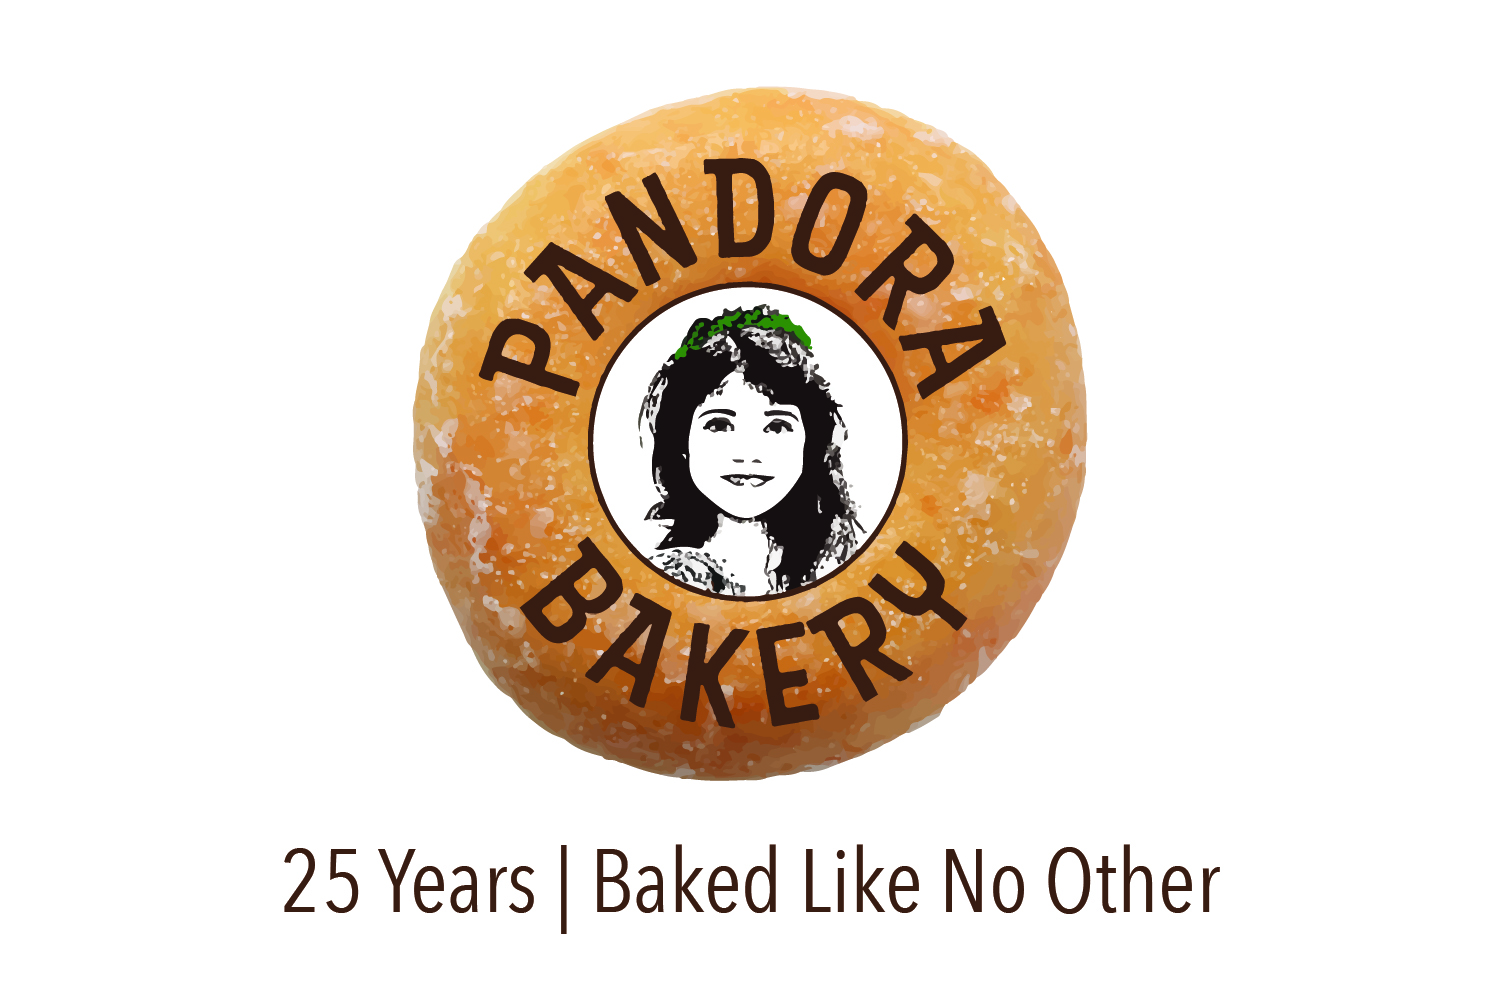 Pandora Bakery, a family-run business, originated in the heart of our home kitchen where our passion for baking coalesced with a singular, humble food item: the muffin. Our muffins, acclaimed for their unique taste and texture, were met with such rave reviews that they served as the stepping stone for what would ultimately become a full-fledged bakery. This venture has not only allowed us to expand our culinary horizons but also to share our love for quality baked goods with the community. Throughout our journey, we have remained committed to using the finest ingredients and traditional baking methods. Our goal is not just to create delicious muffins, but to offer a variety of baked goods that bring comfort and joy to our customers. For the Pandora Bakery Team, every item is made with love and care. We believe in using natural ingredients and avoiding preservatives so that each bite you take is as wholesome and fresh as possible.